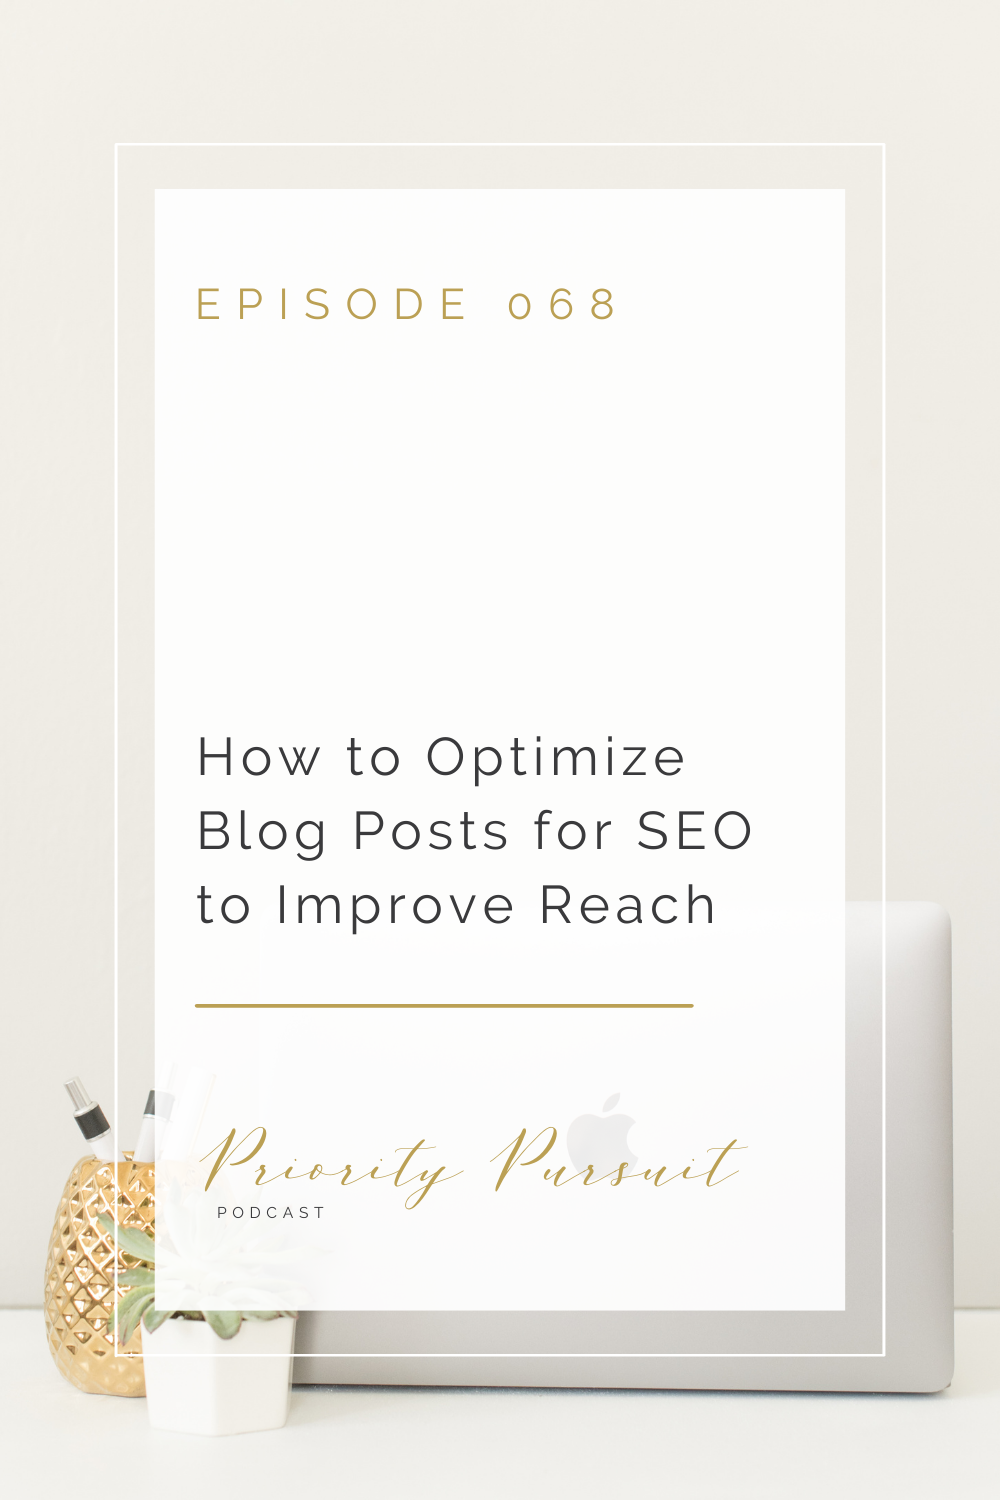 Victoria Rayburn explains how to optimize blog posts for SEO in this episode of “Priority Pursuit.” 